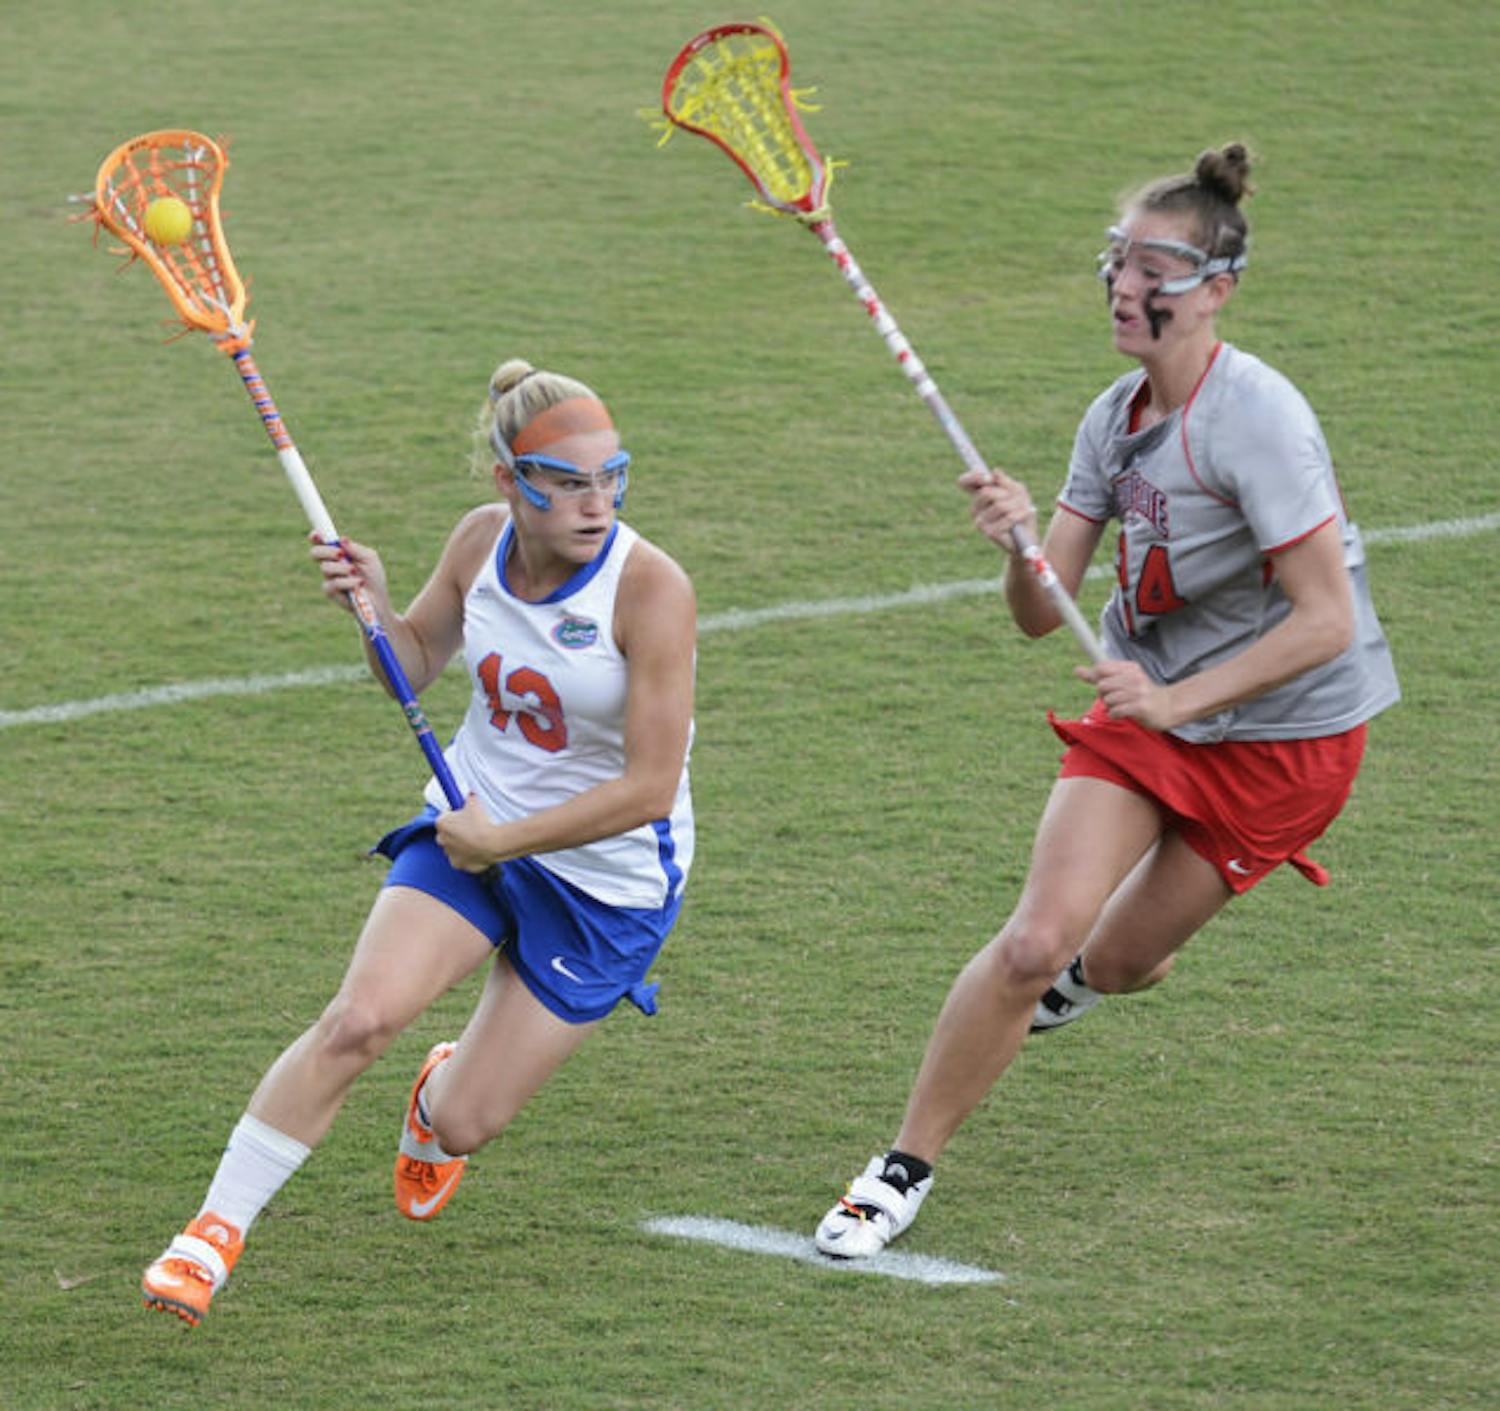 Florida attacker Ashley Bruns (13) runs past Ohio State defender Tayler Kuzma (24) in the Gators’ 13-7 win against the Buckeyes on March 23 at Dizney Stadium. Bruns scored four goals in Florida's 16-5 win against Denver in the second round of the NCAA Tournament.